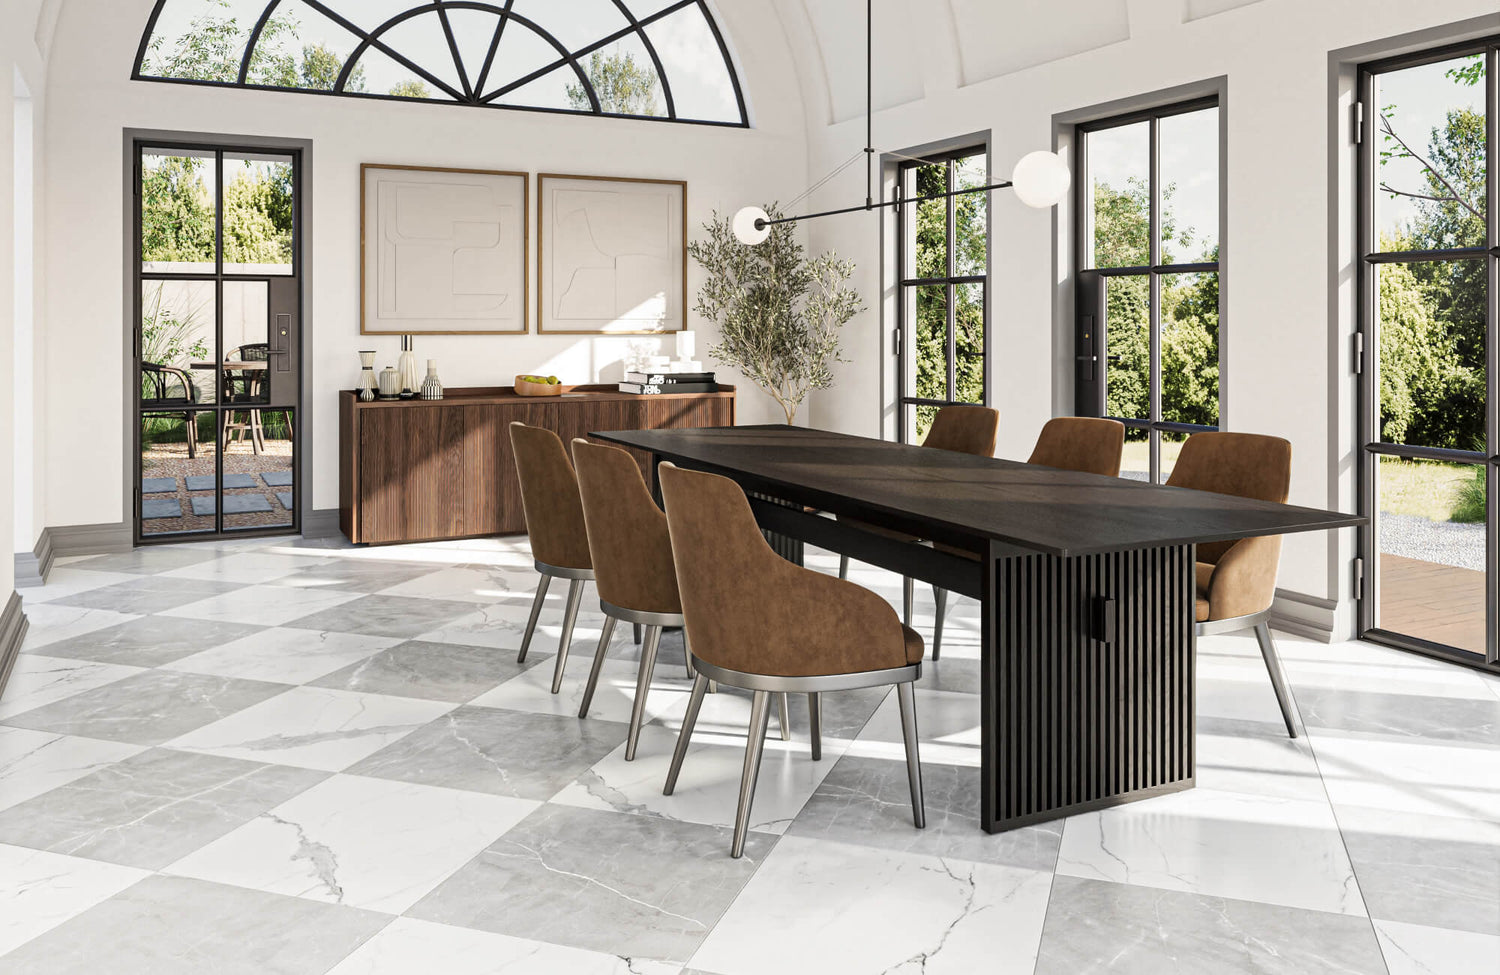 Elegant dining room with large windows, a black table, brown chairs, and a checkered floor of gray and white marble look tiles